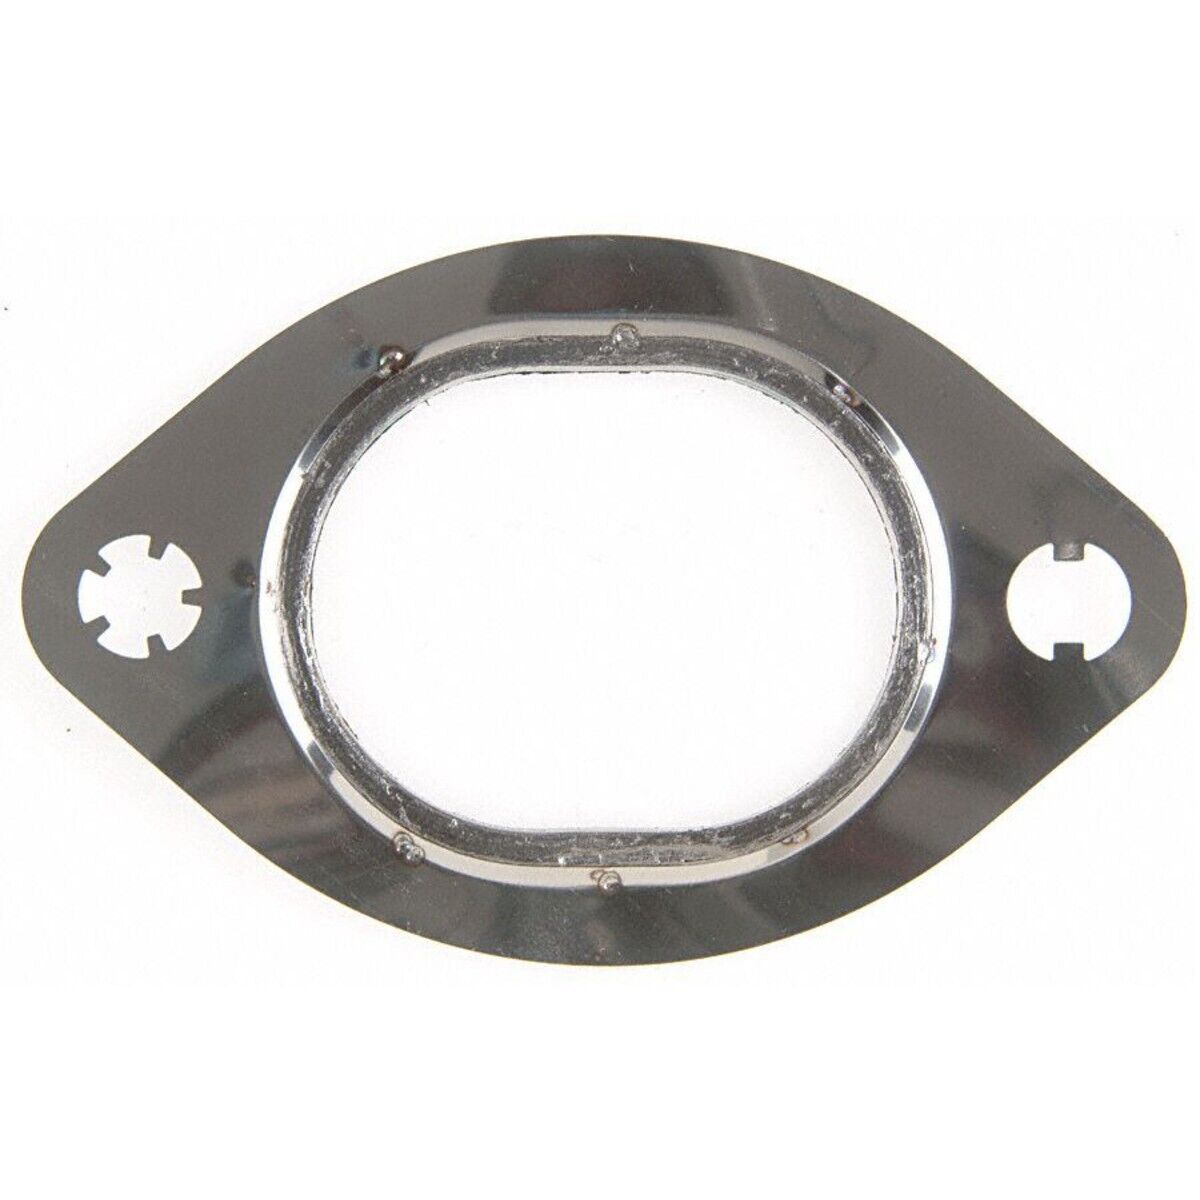 61203 Felpro Exhaust Flange Gasket for Mark Ford Mustang Lincoln VIII Marauder